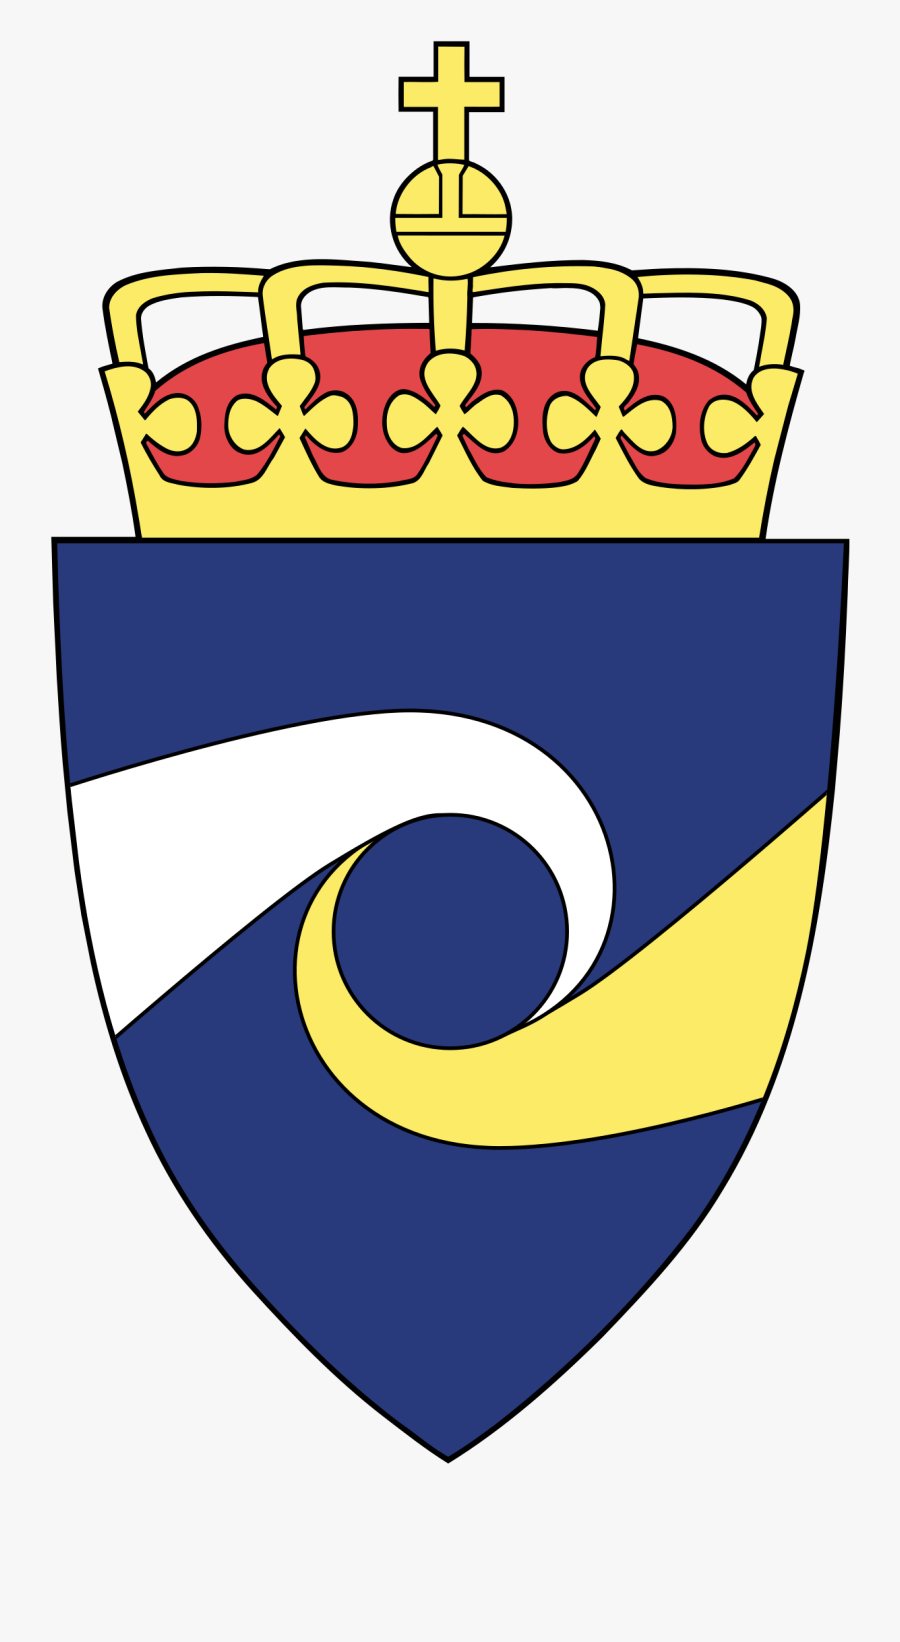 Clip Art Norwegian Wikipedia - Norway Coat Of Arms Png, Transparent Clipart